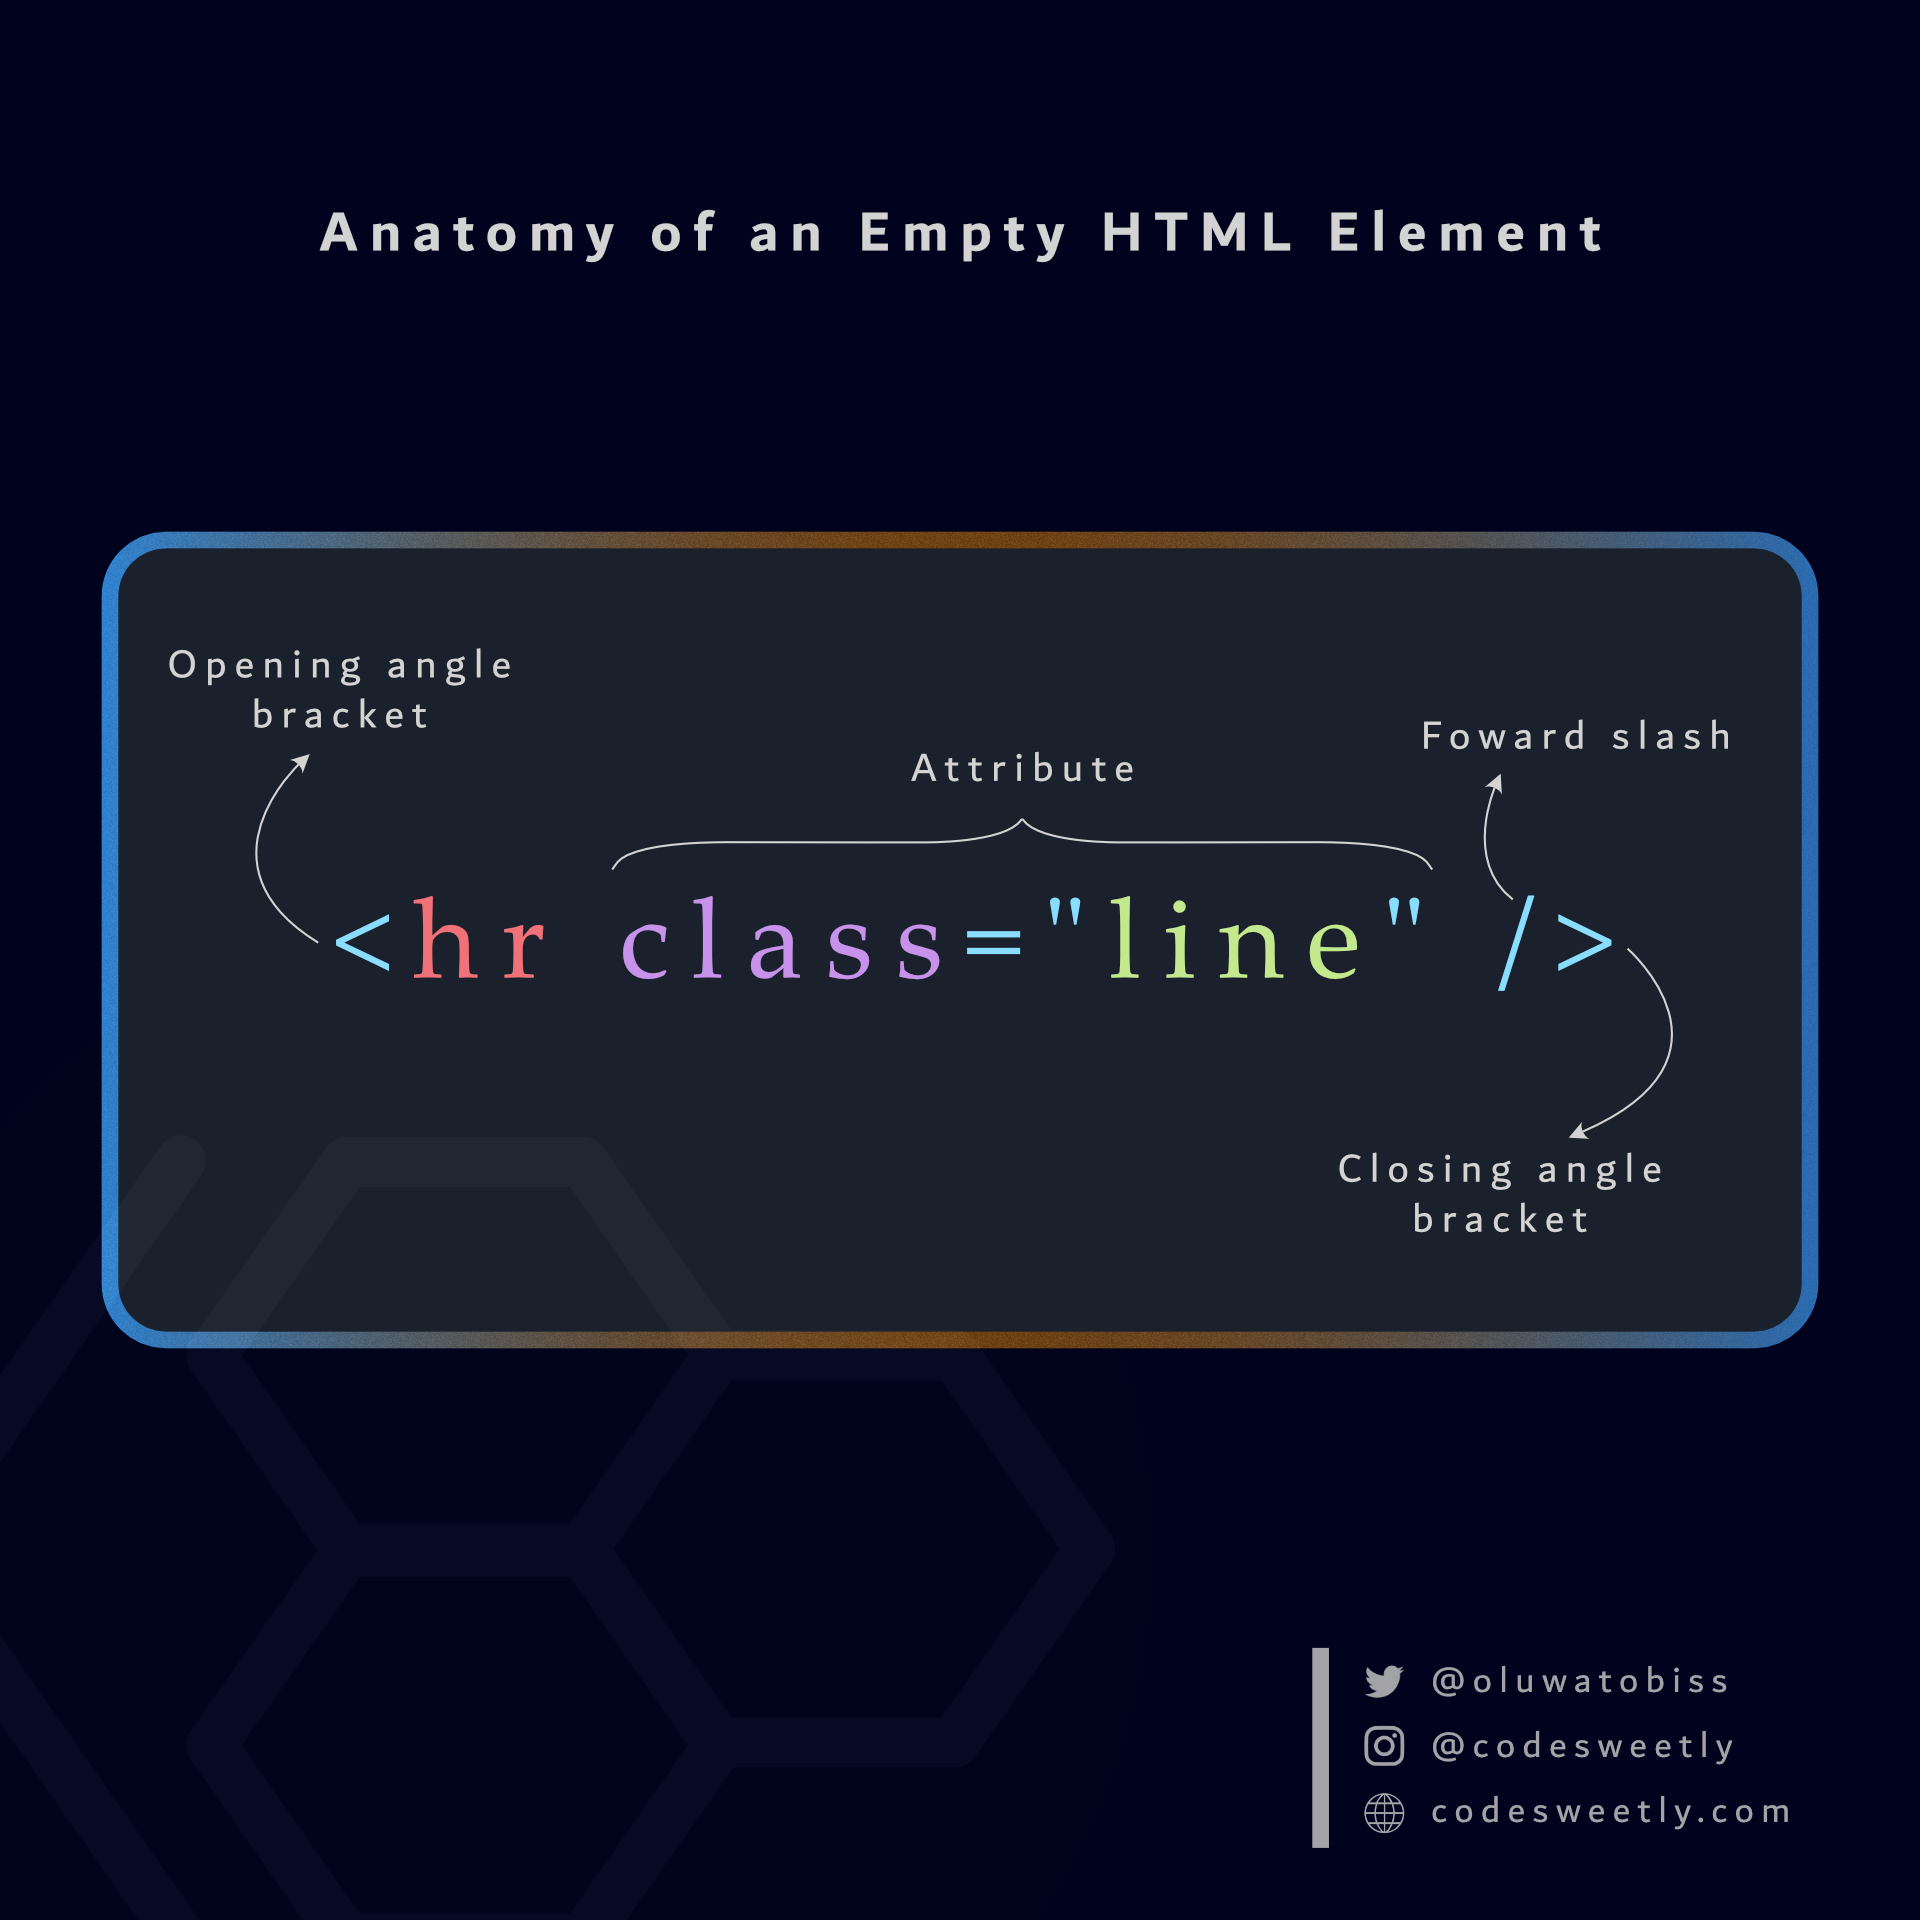 An empty HTML element has only an opening tag